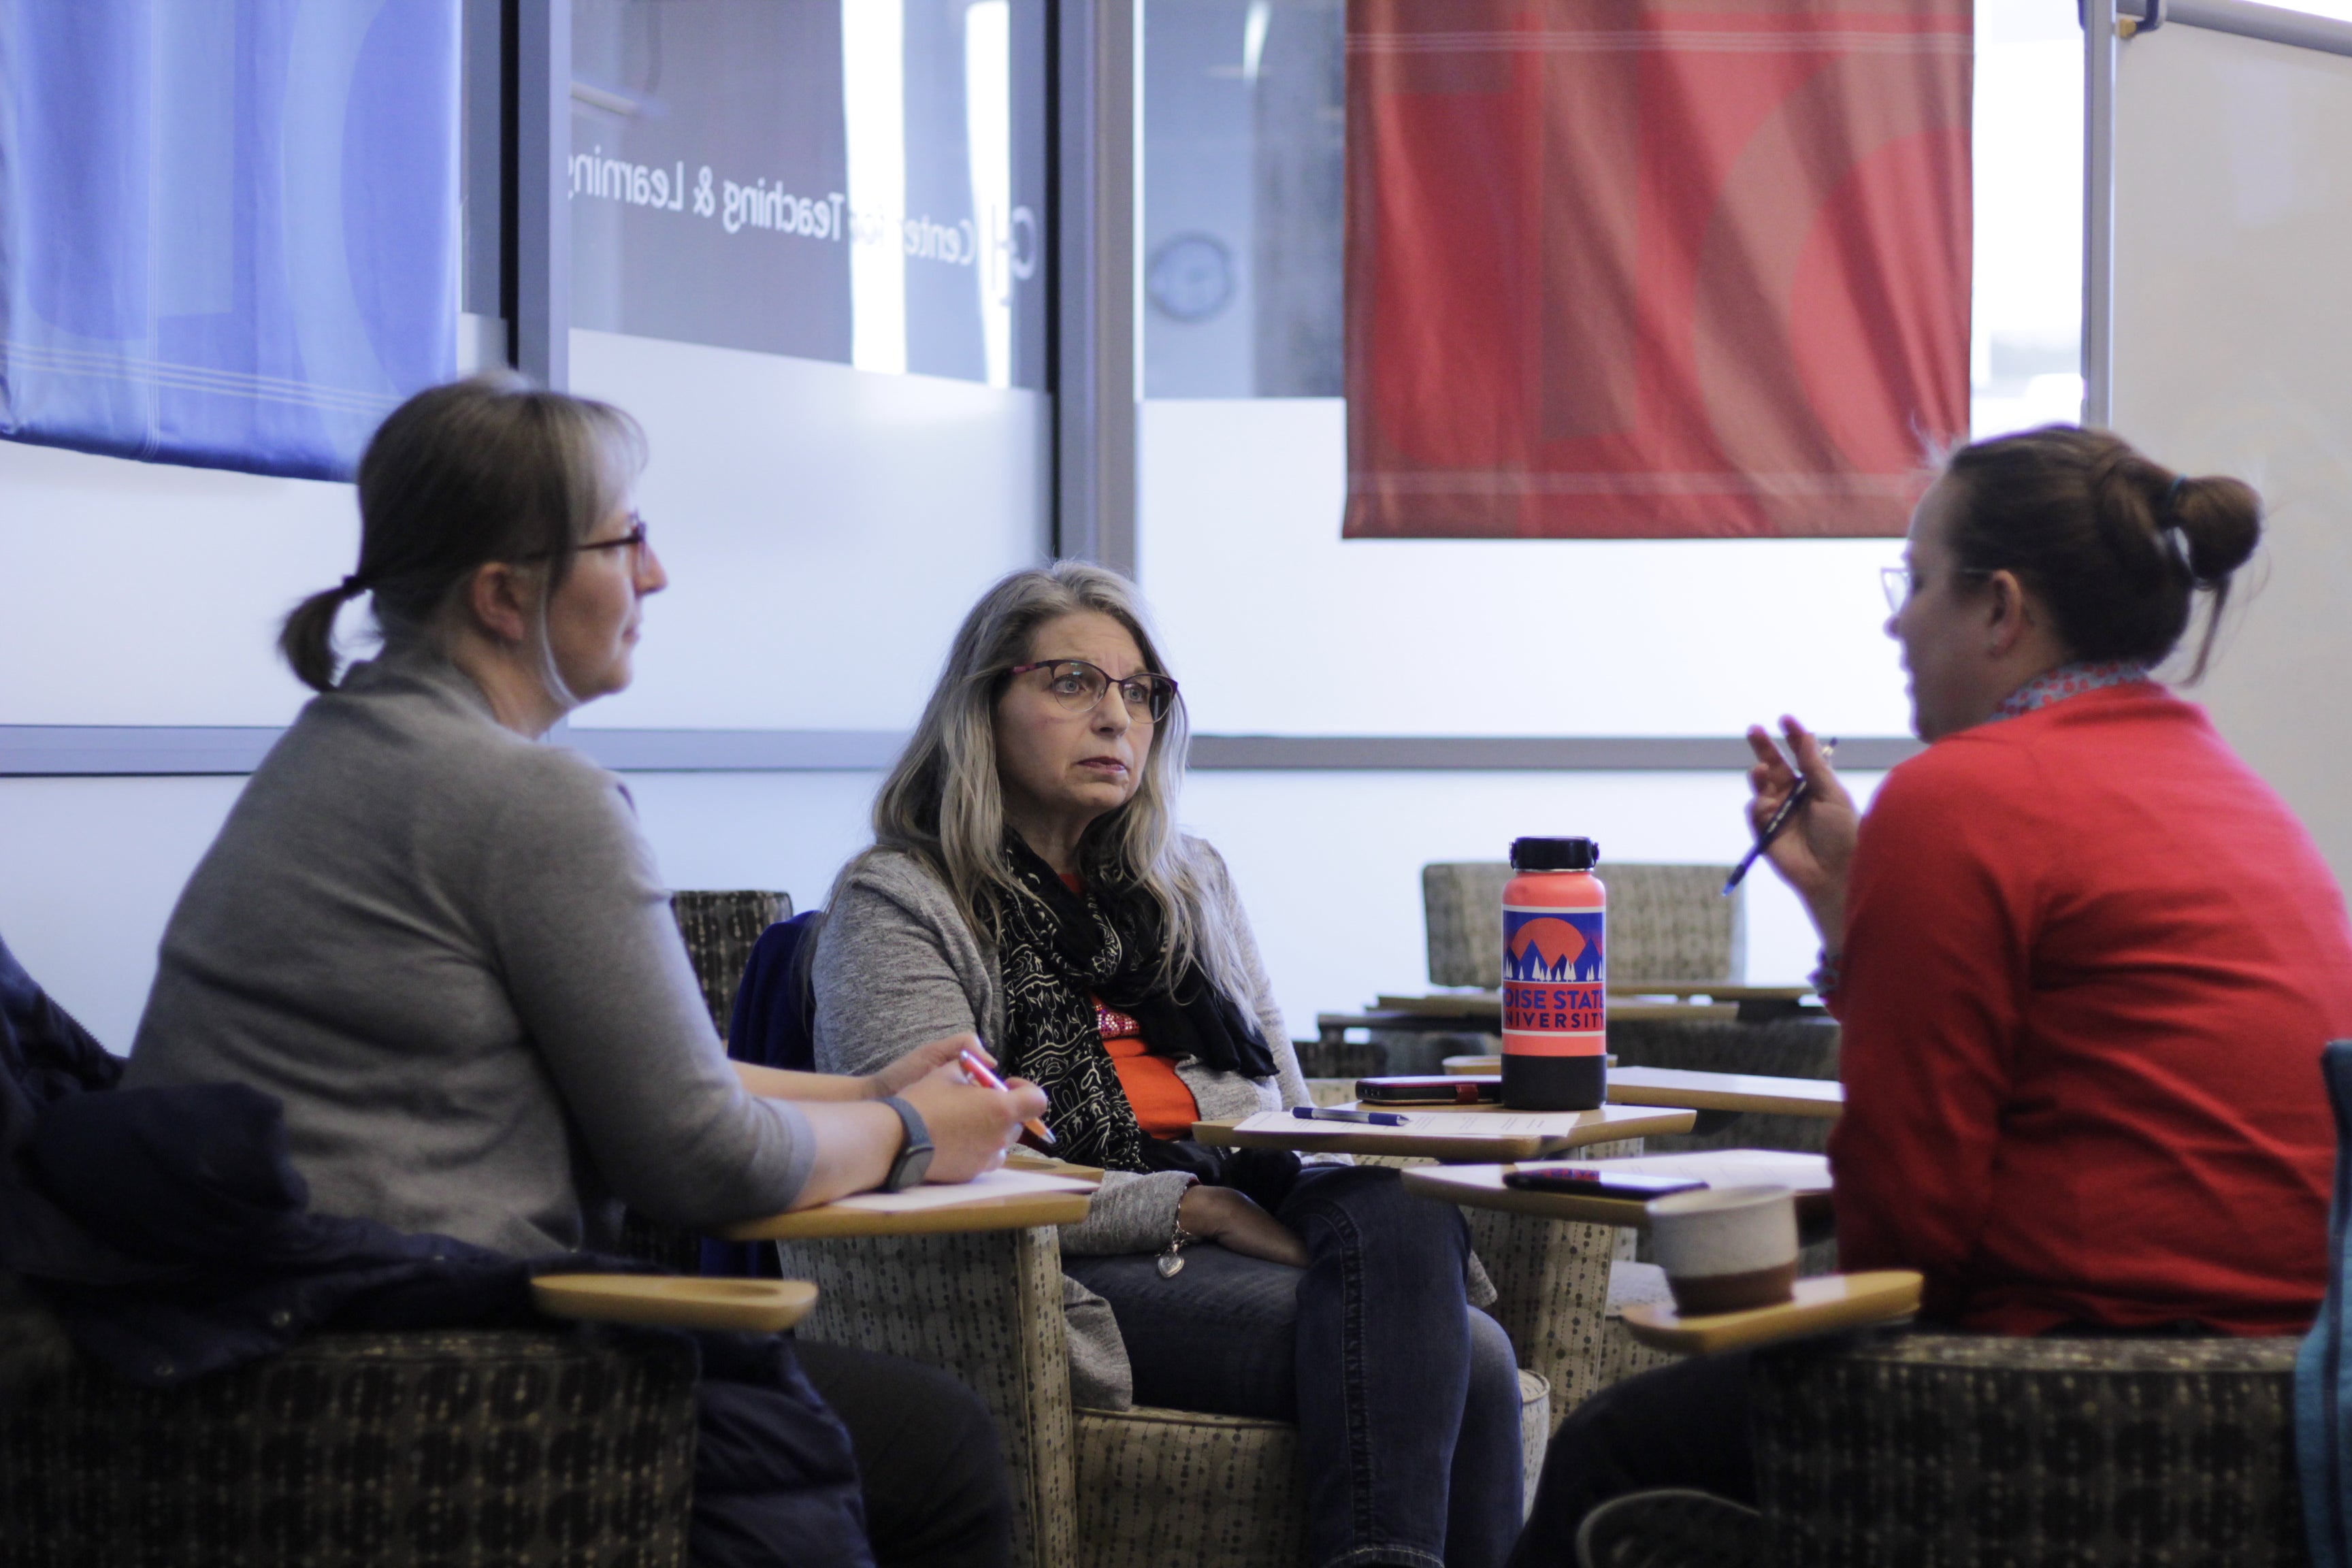 Three faculty members discuss workshop topic